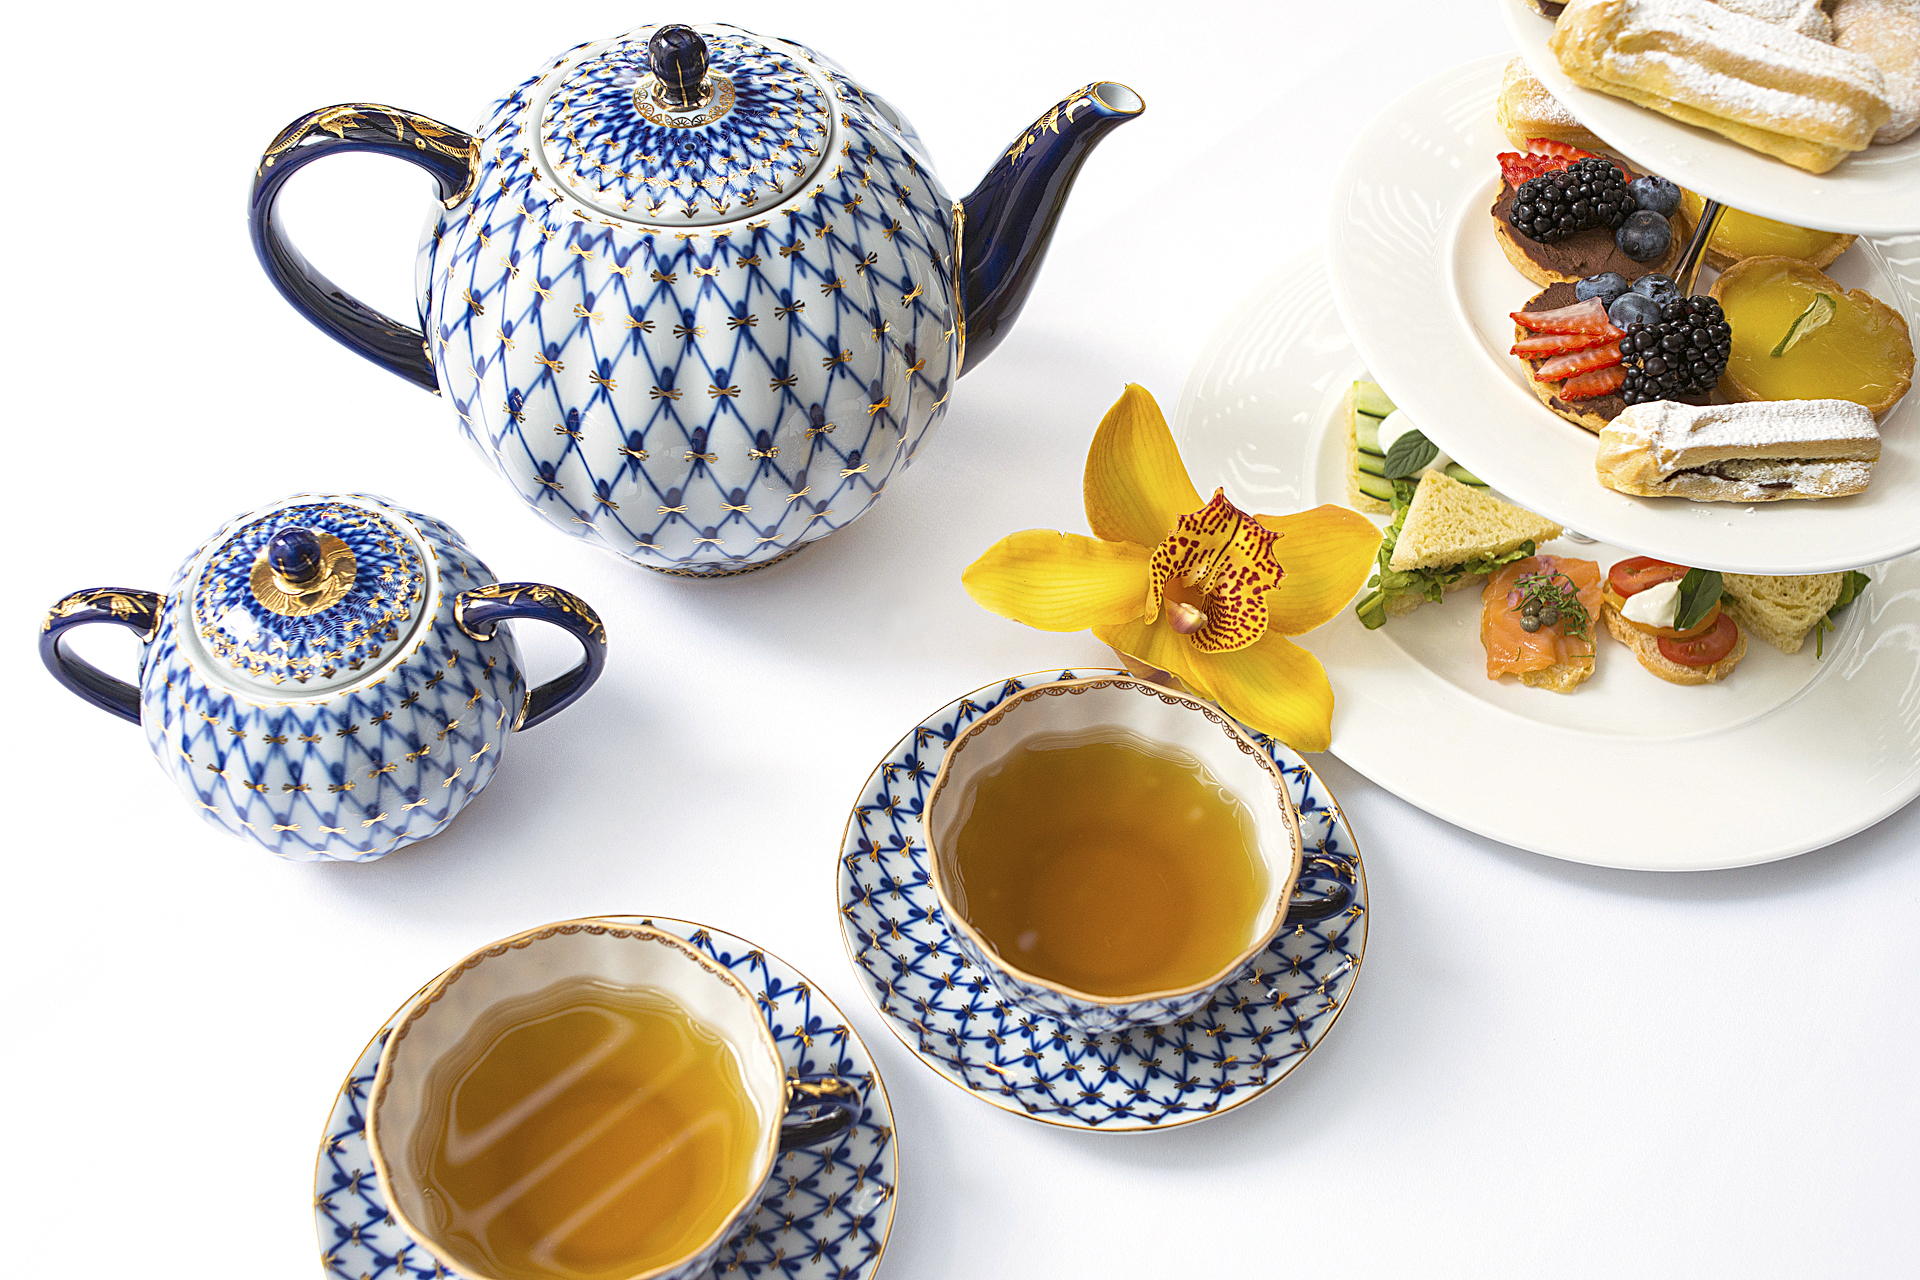 Hotel Matilda Pours It On with Newest Amenity: Russian Tea Service ...